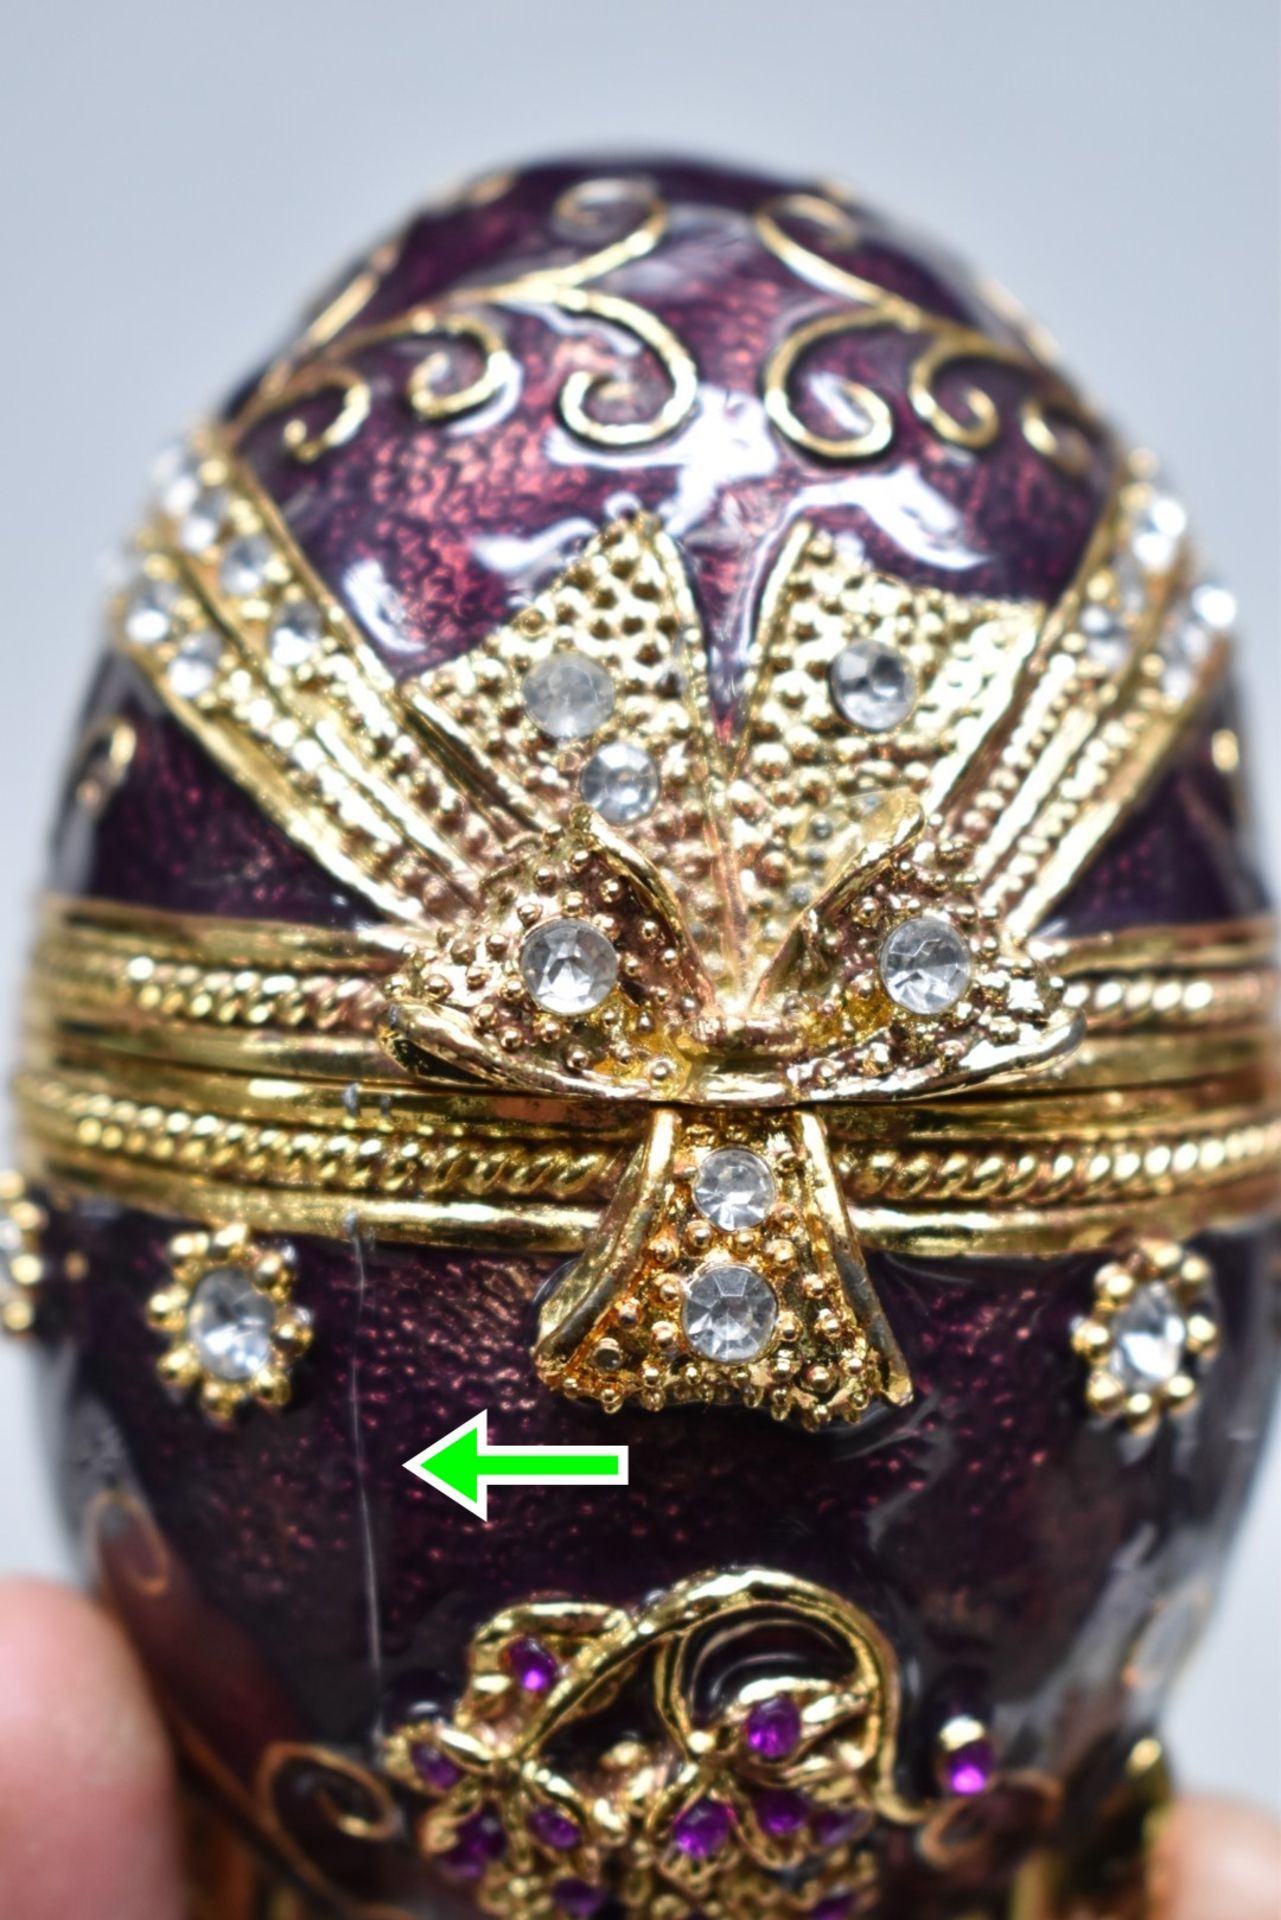 1 x Decorative Faberge-Style Clockwork Musical Enameled Egg, In Purple - Ref: CNT733/WH2/C23 - CL845 - Image 3 of 4